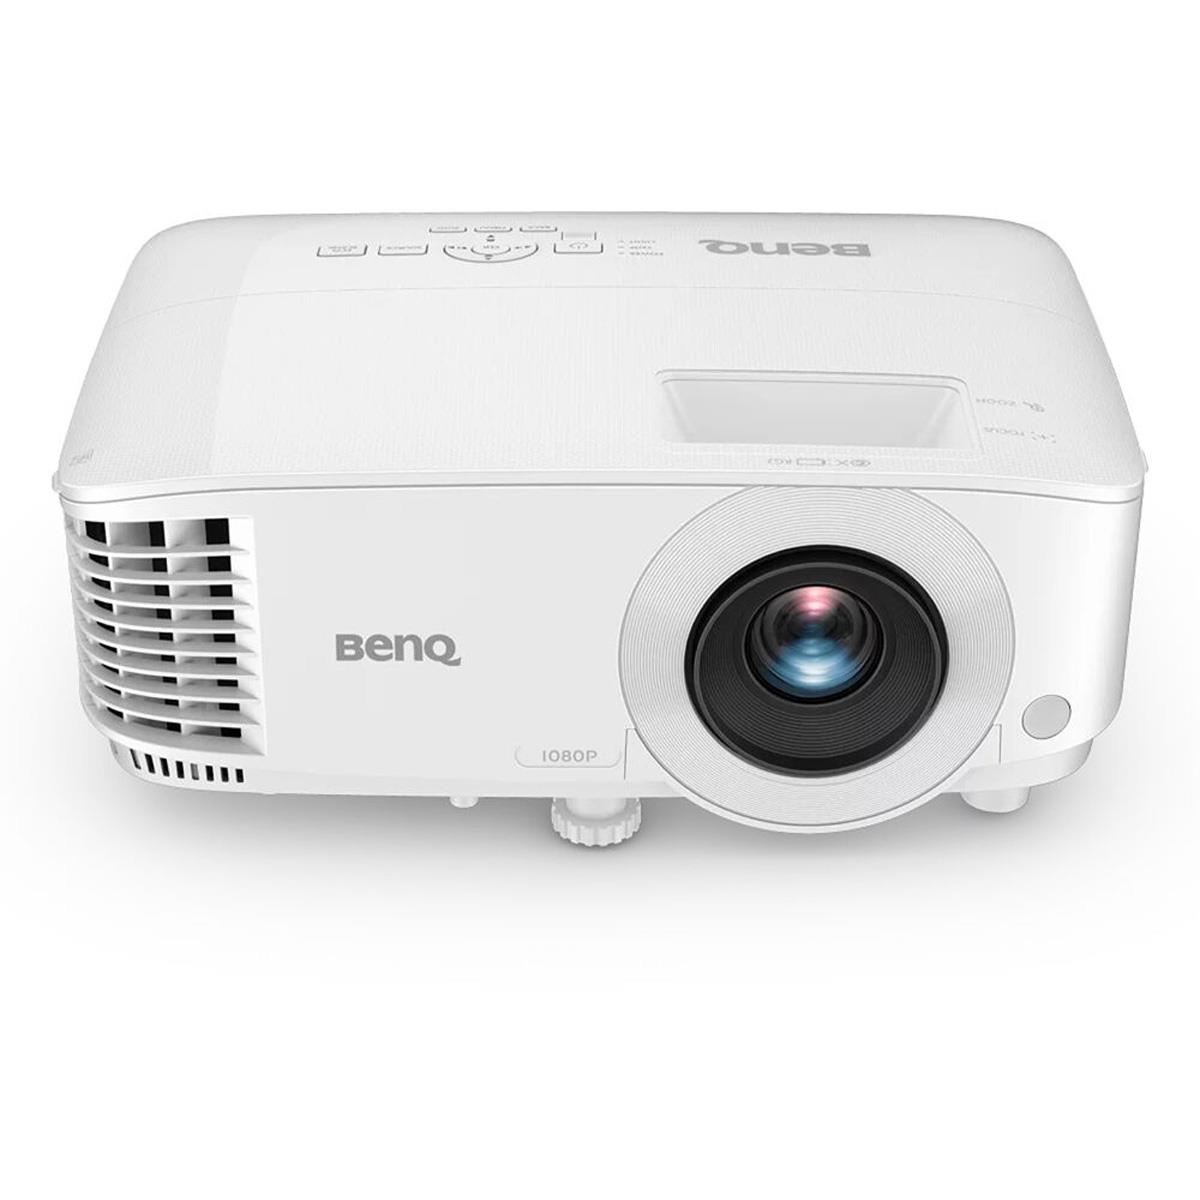 Image of BenQ TH575 Full HD DLP Home Theater Gaming Projector